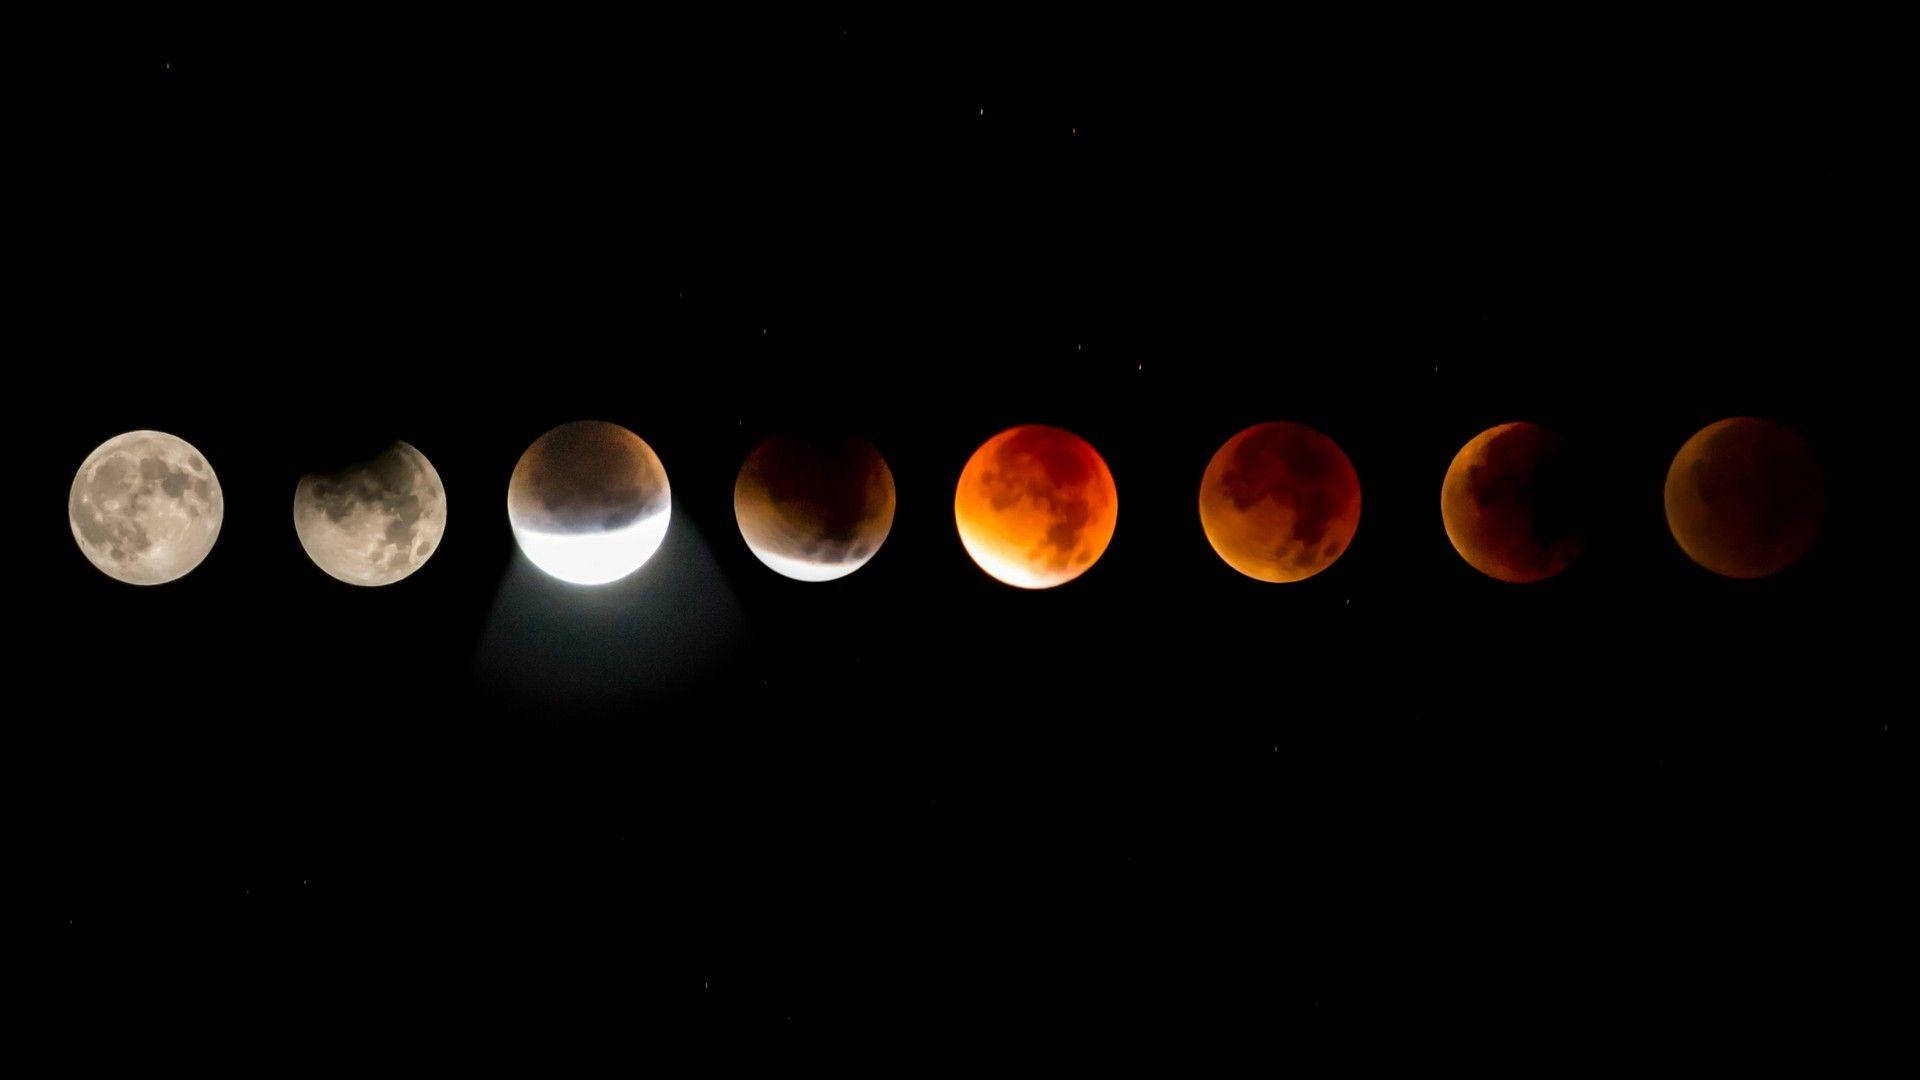 Top 999+ Lunar Eclipse Wallpapers Full HD, 4K Free to Use